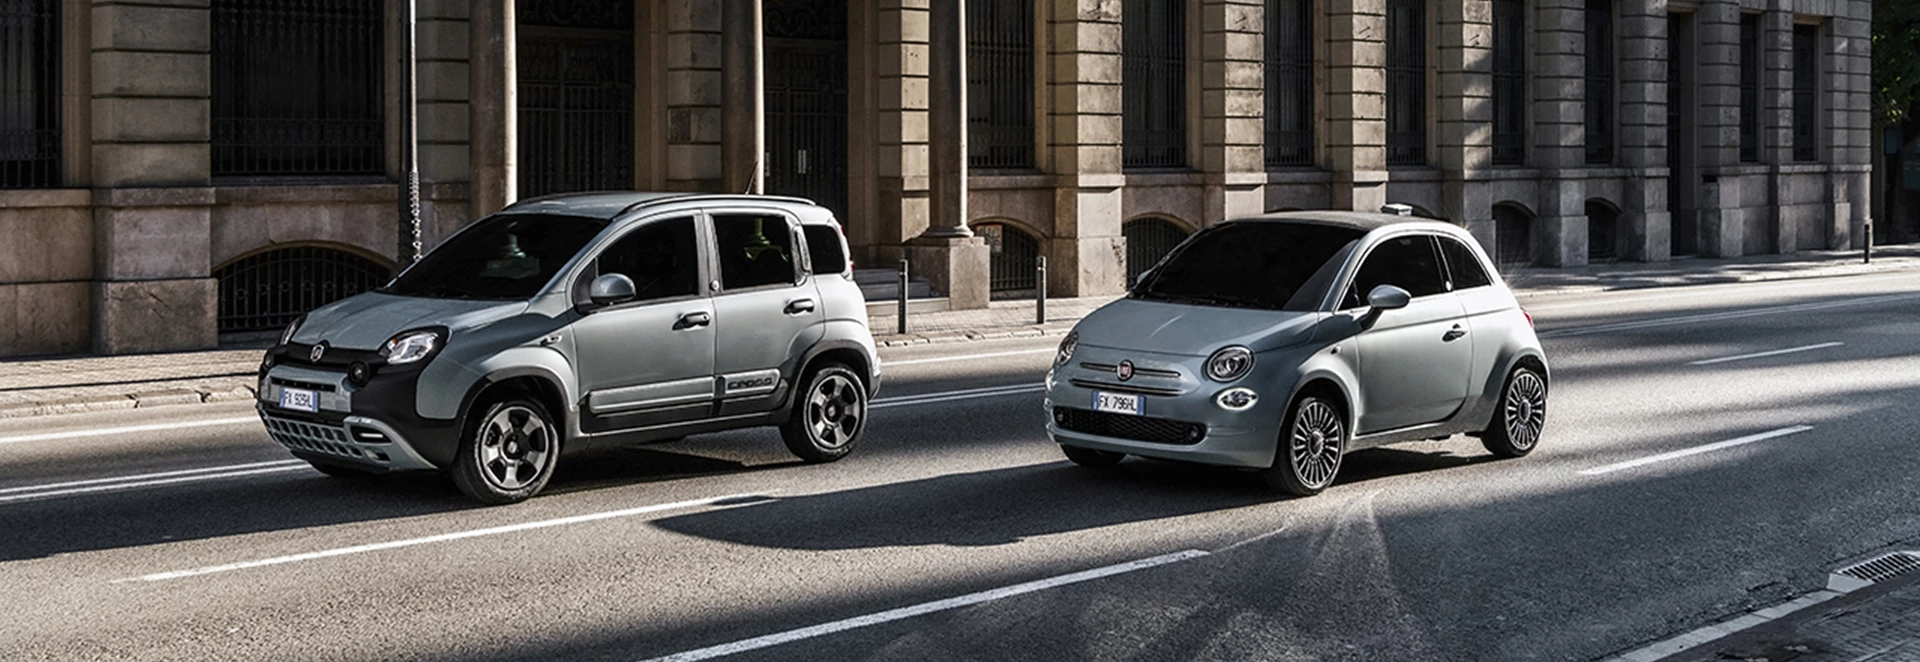 5 reasons why Fiat is the go-to brand for city cars 